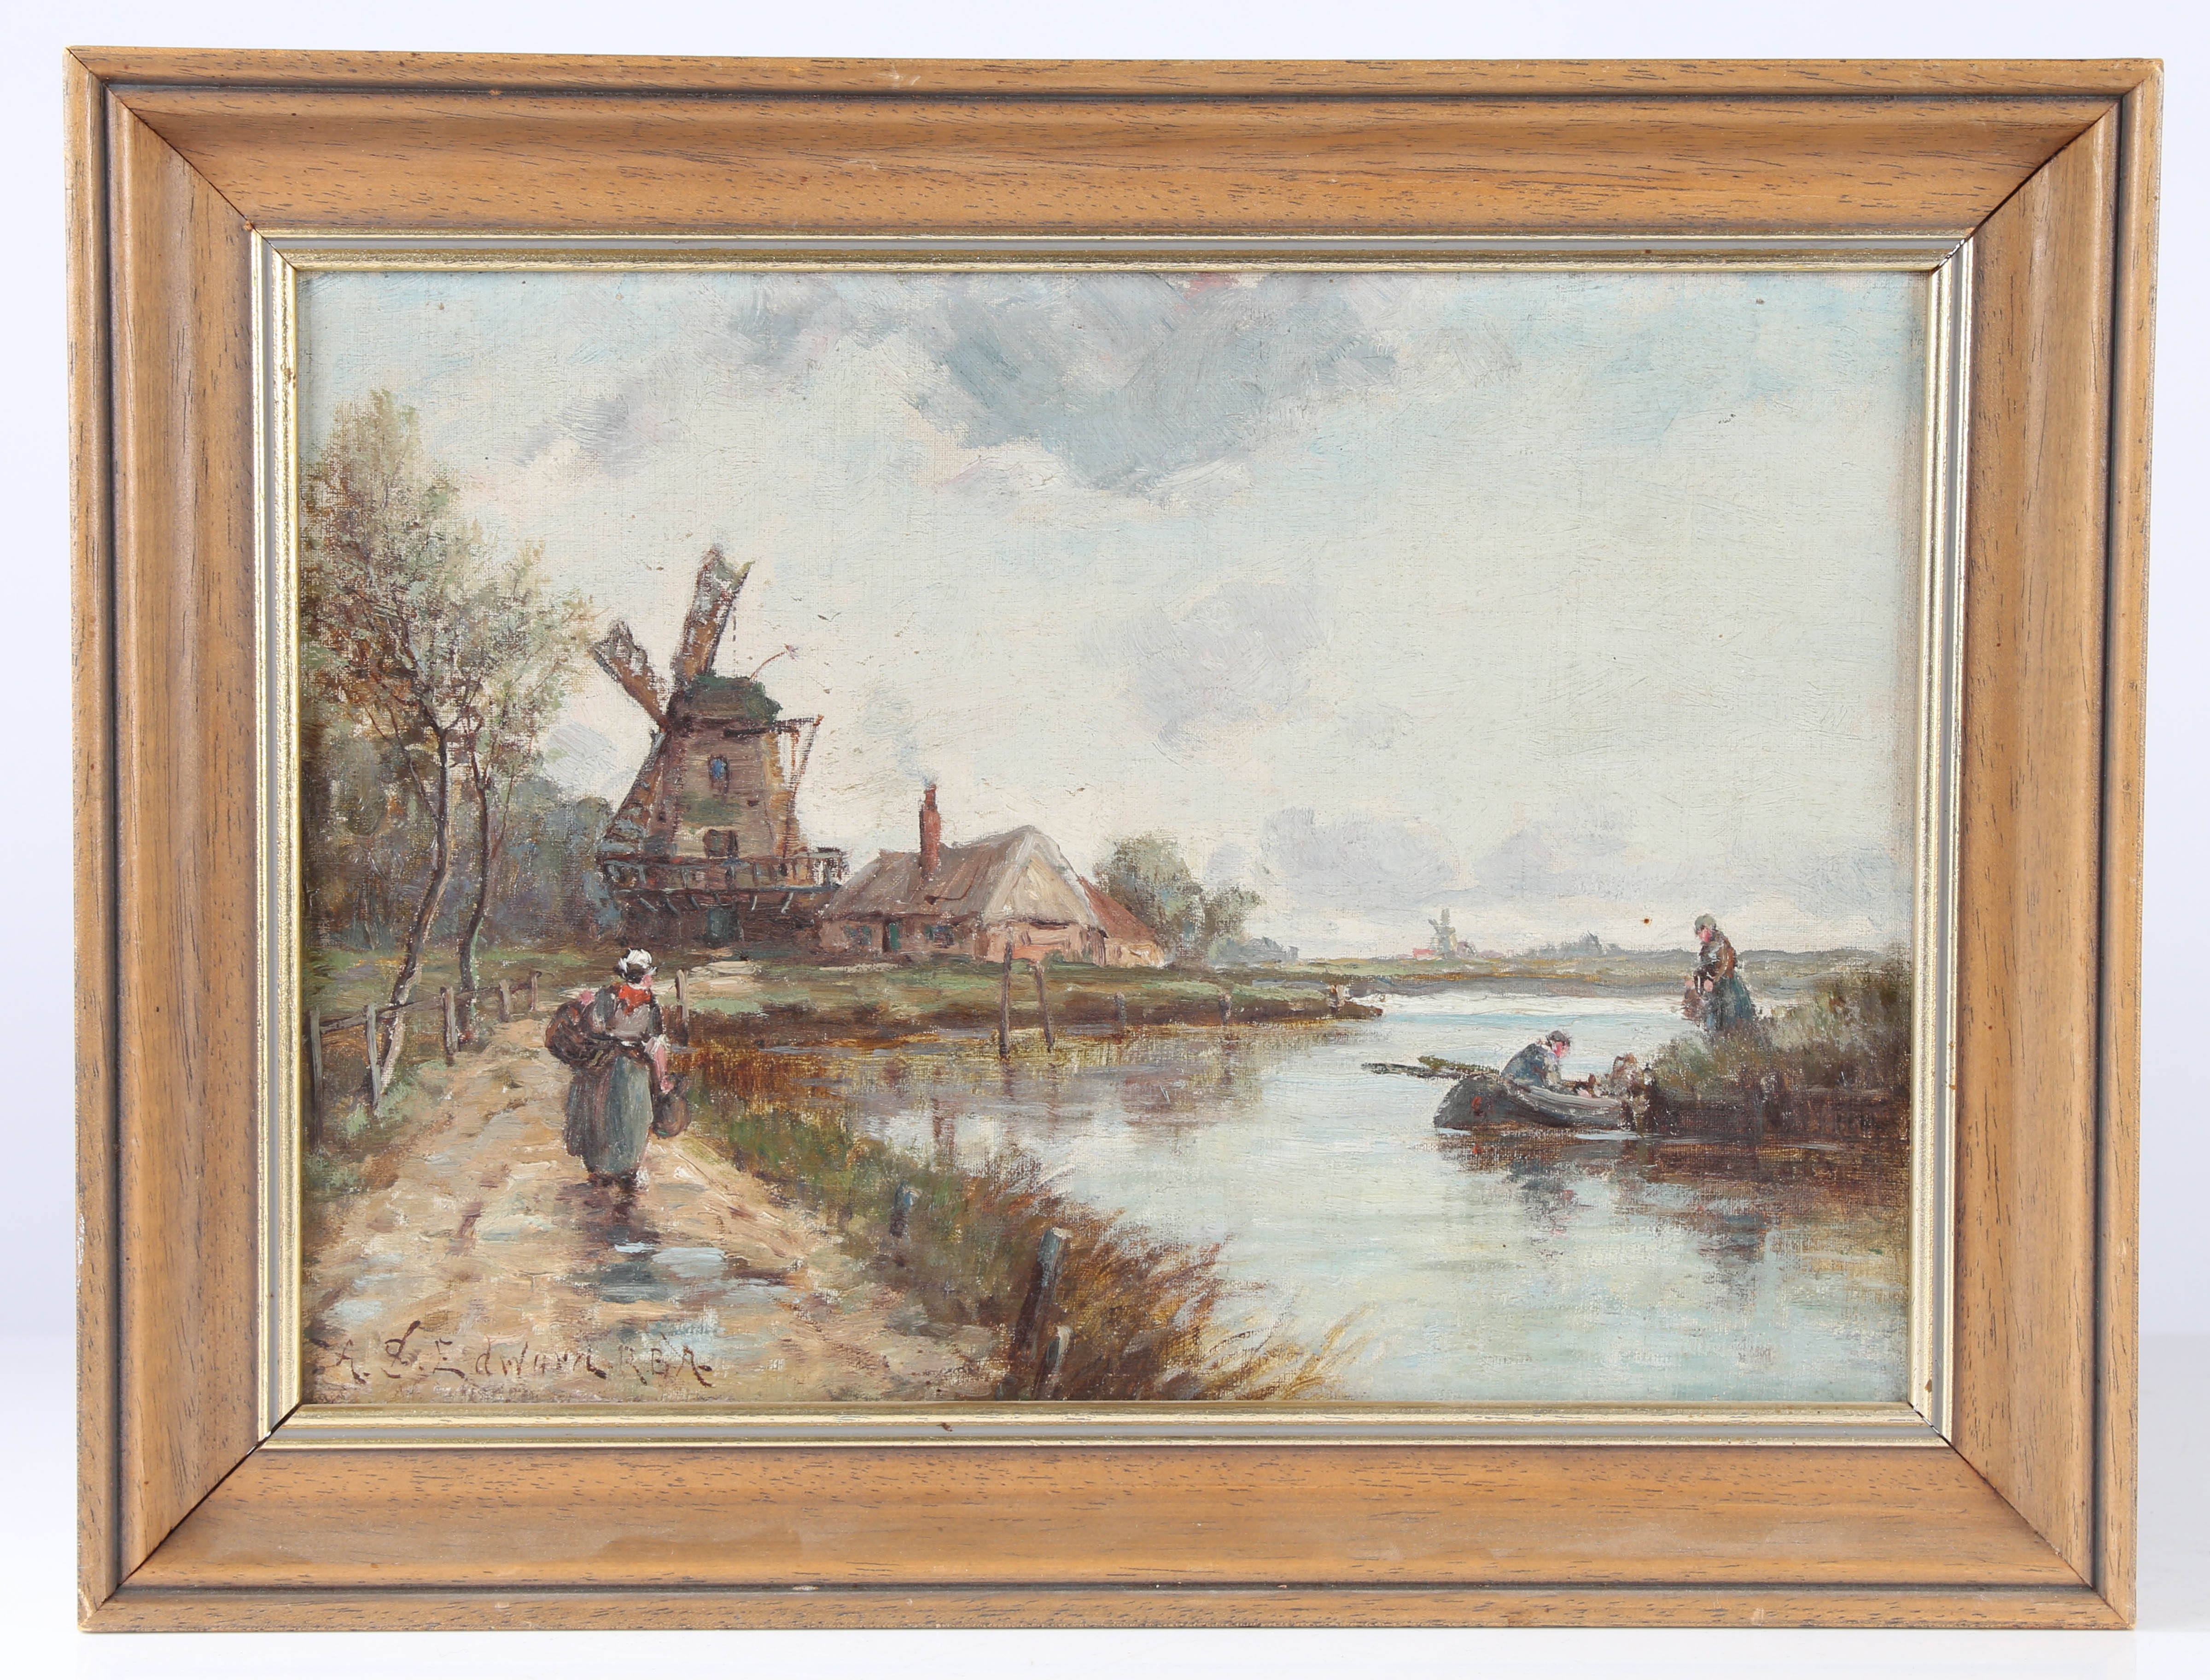 Alfred Sanderson Edwards, RBA (British, 1852-1915) "In The Netherlands" & "at Zwijndredcht" both - Image 2 of 2